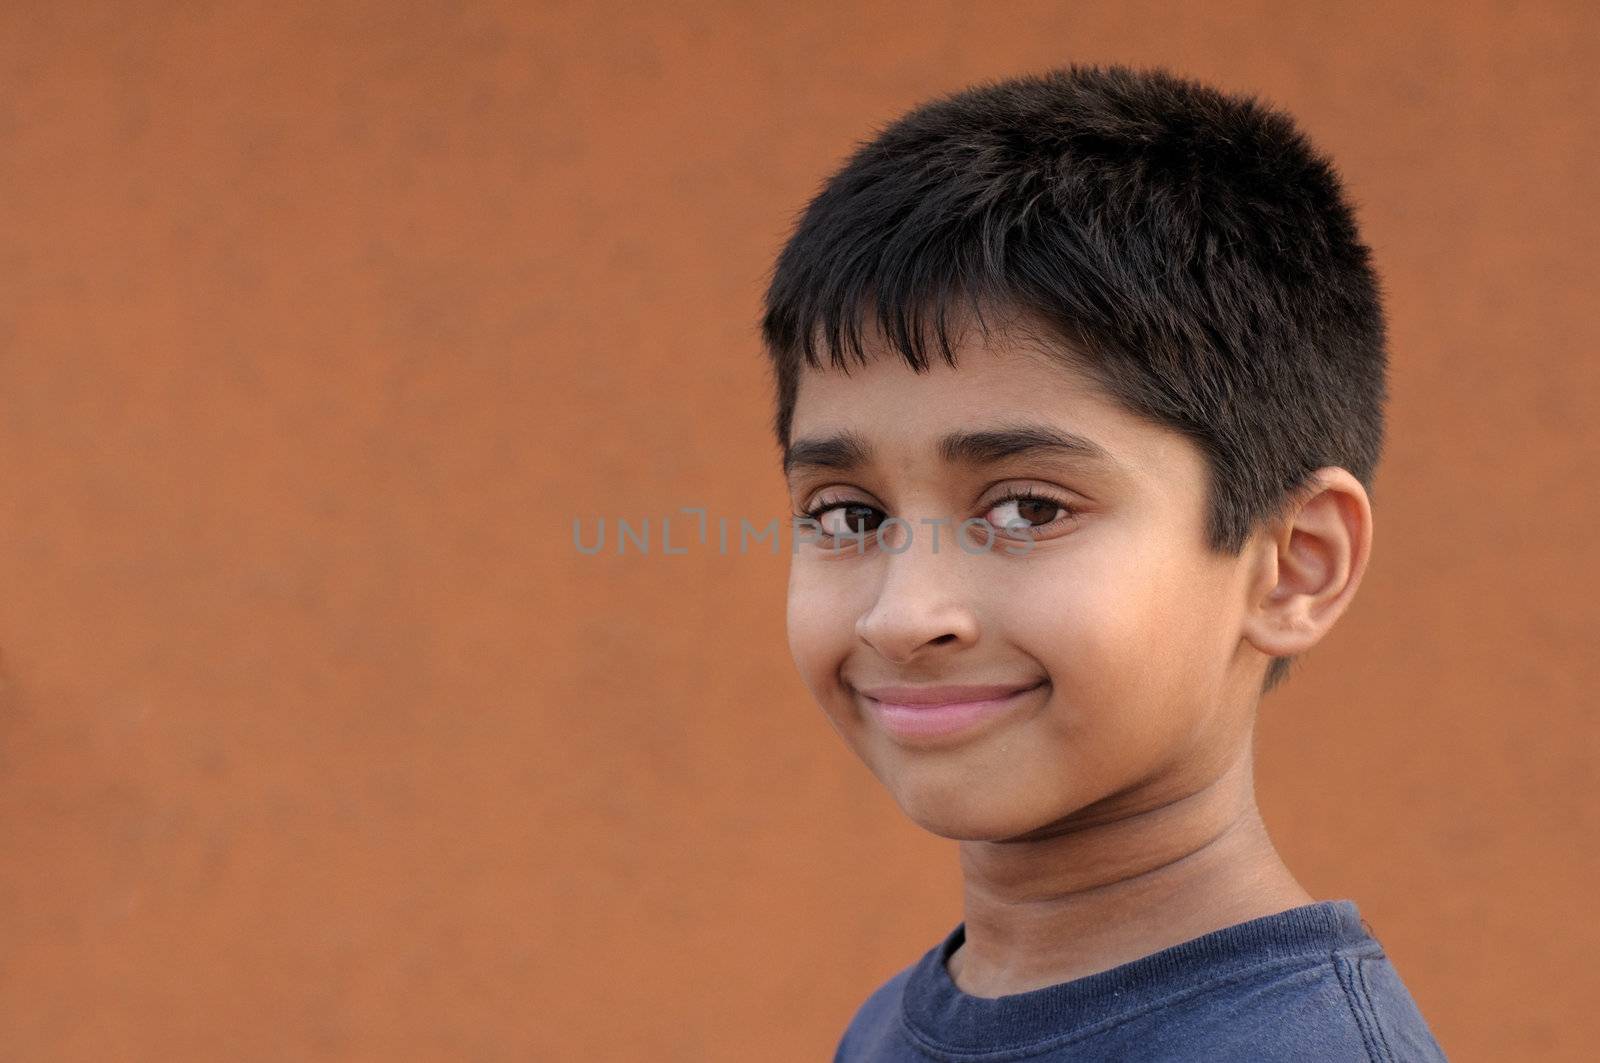 Handsome Indian kid smiling in front of the camera